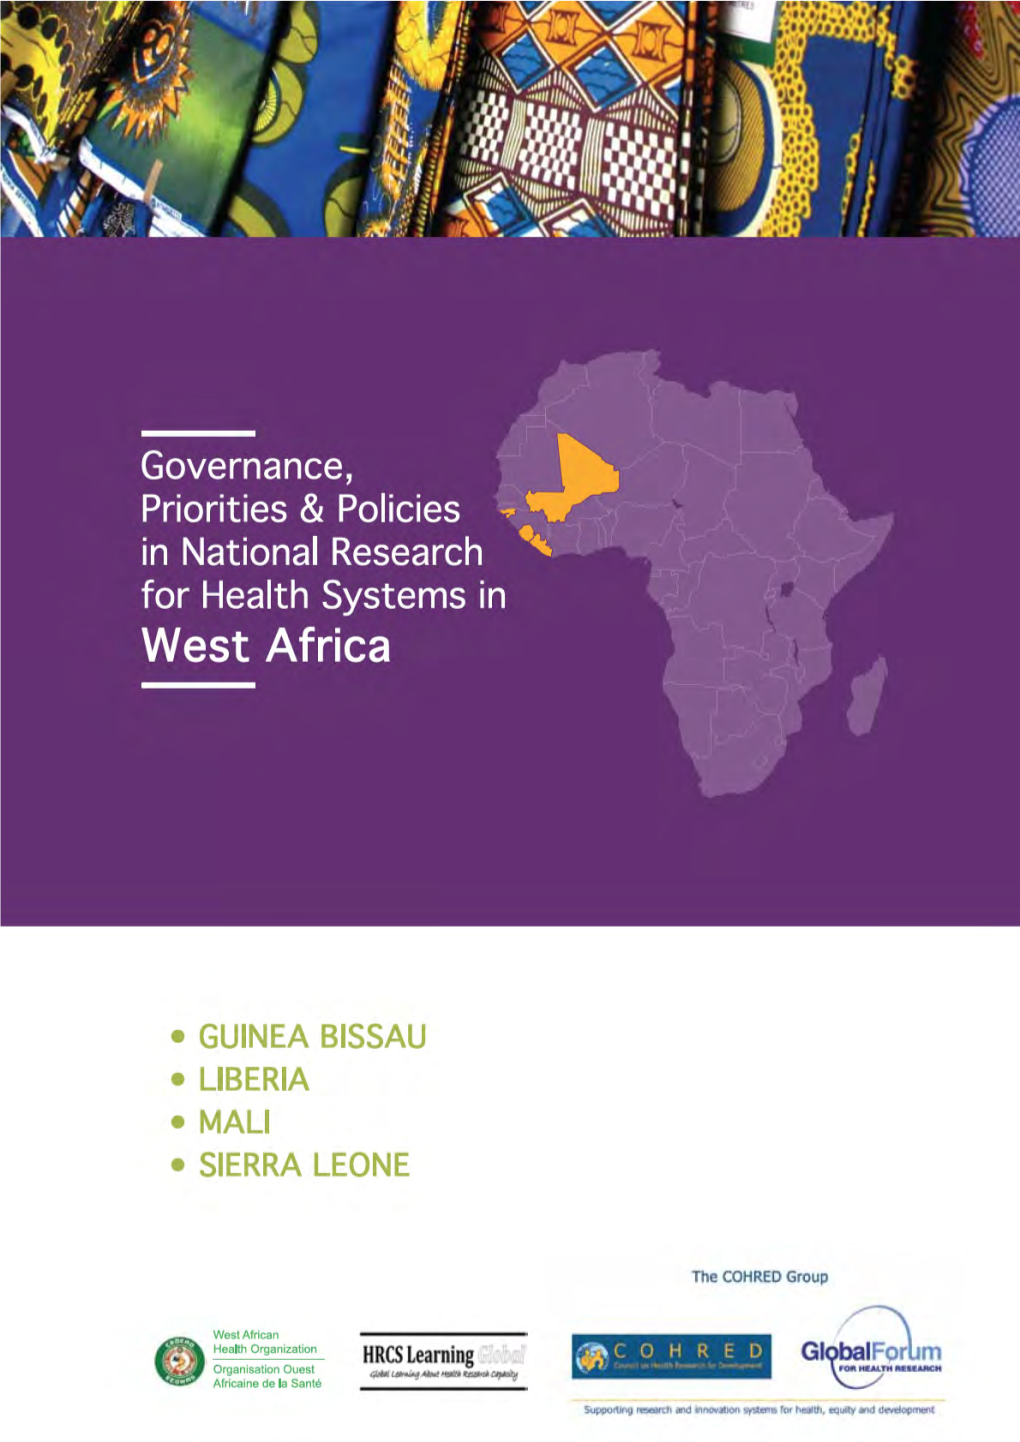 Governance, Priorities & Policies in National Research for Health Systems in West Africa